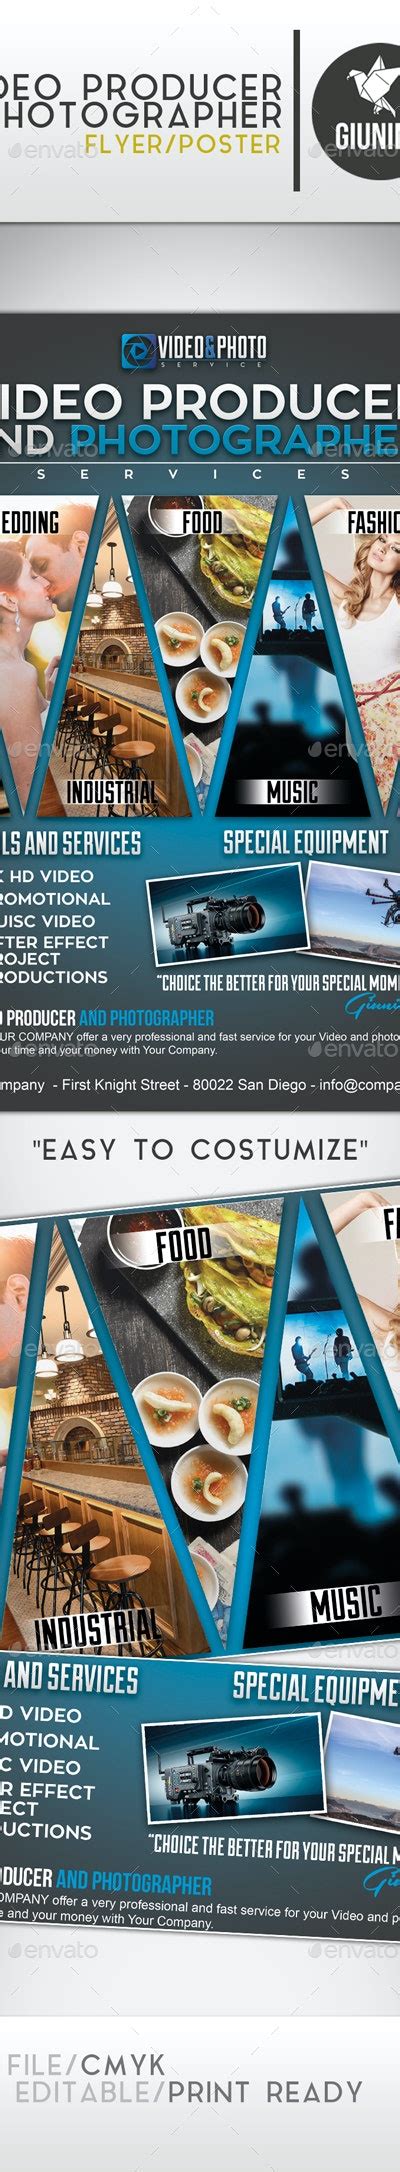 Video Producer And Photographer Flyerposter By Giunina Graphicriver